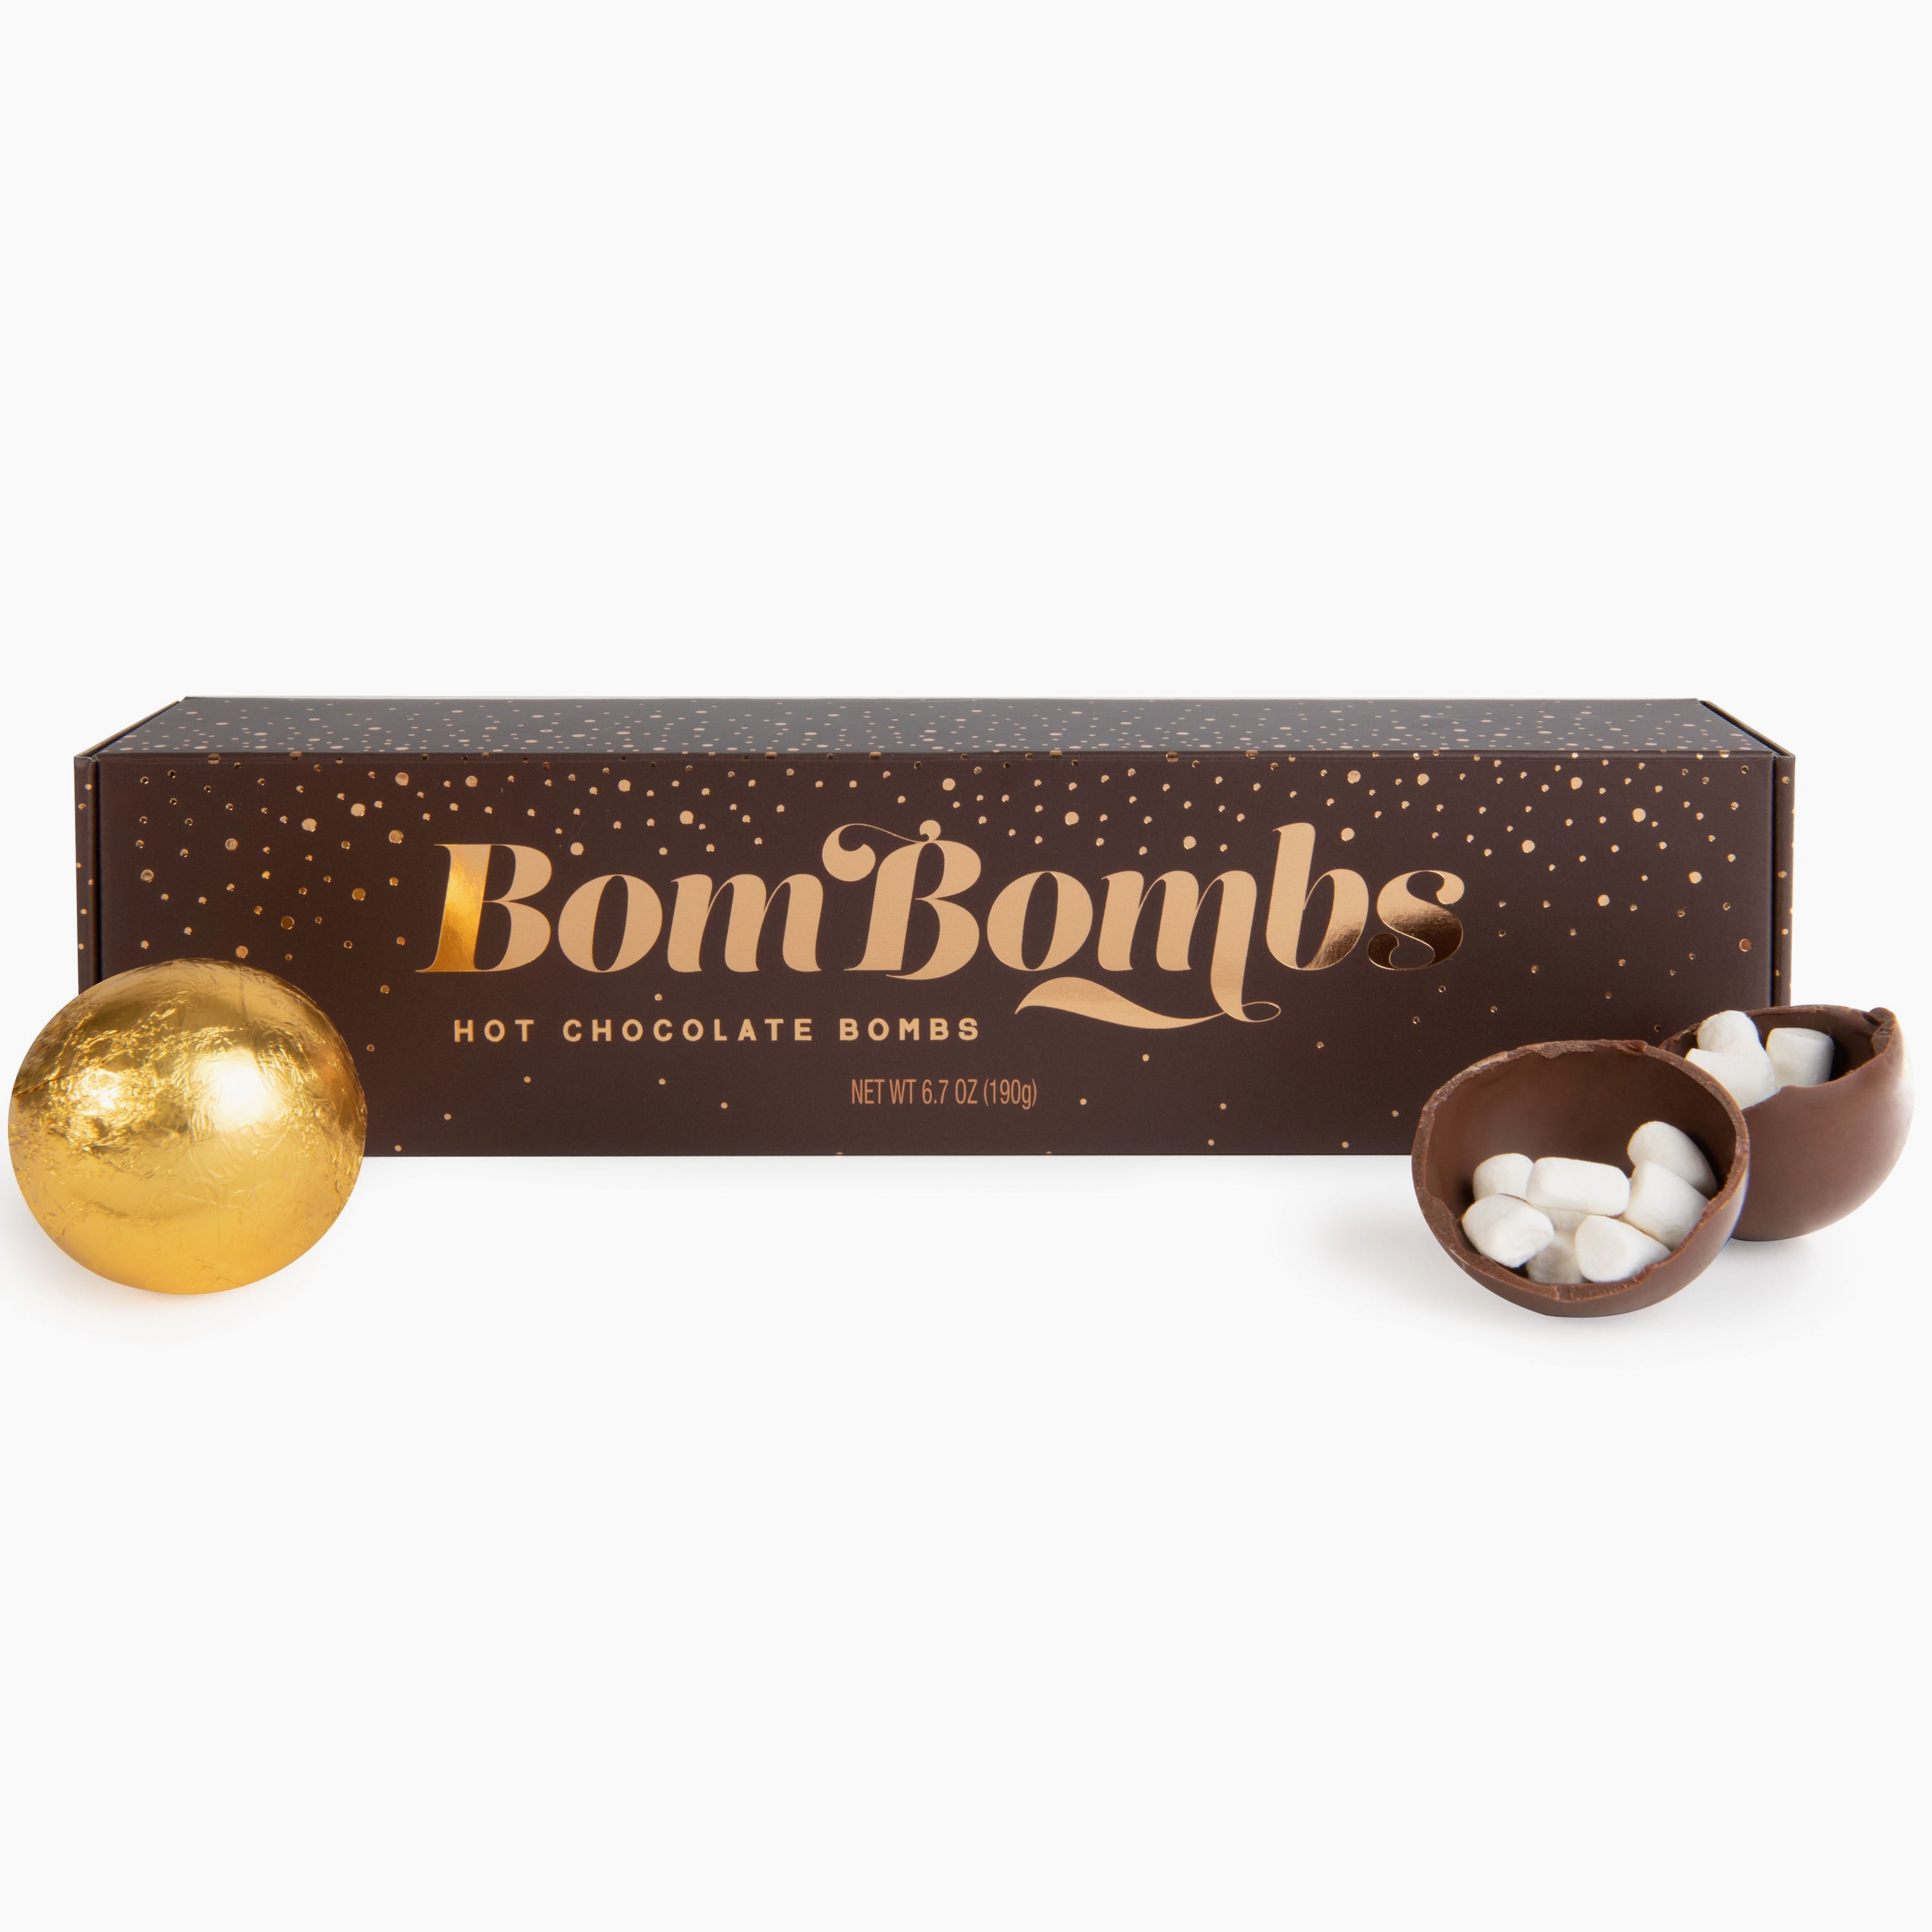 BomBombs Hot Chocolate Bombs, Pack of 5